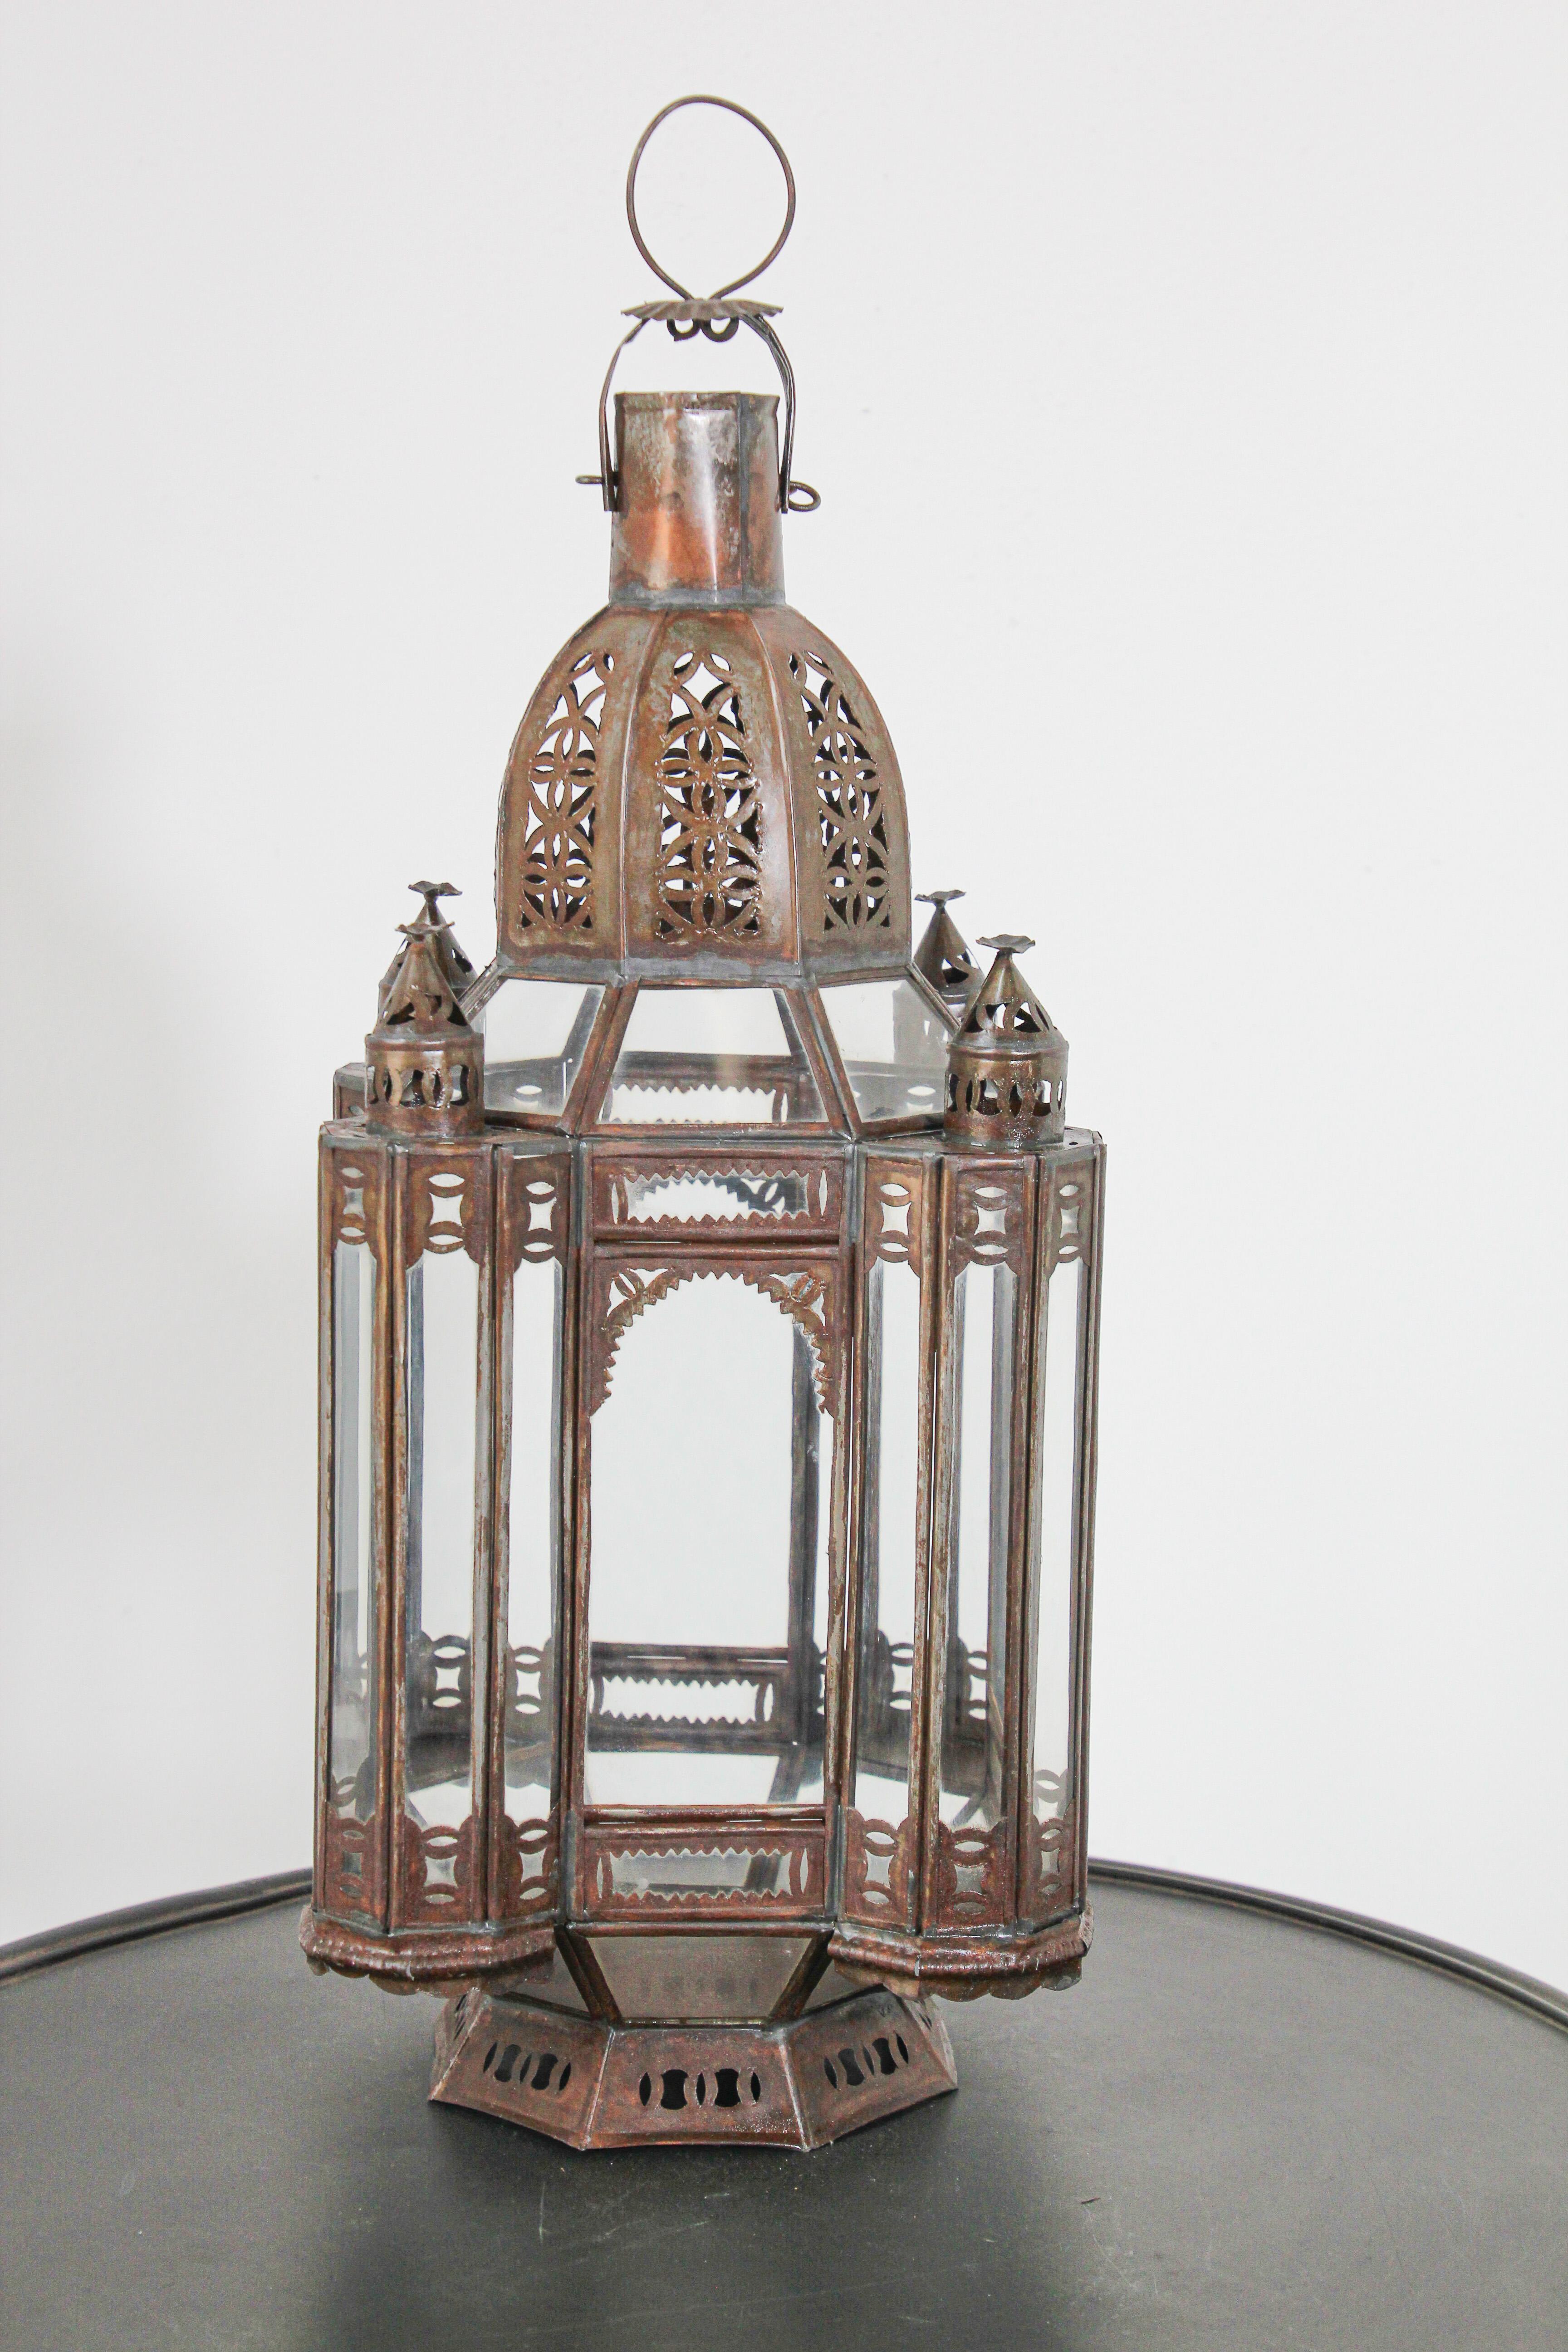 Handcrafted Moroccan metal clear glass lantern or Moorish pendant.
Hurricane candle lamp handmade in Marrakech, vintage metal in rust color finish.
Nice Moorish shape, could be used as a candle lantern on a table, hanging from a tree or as a